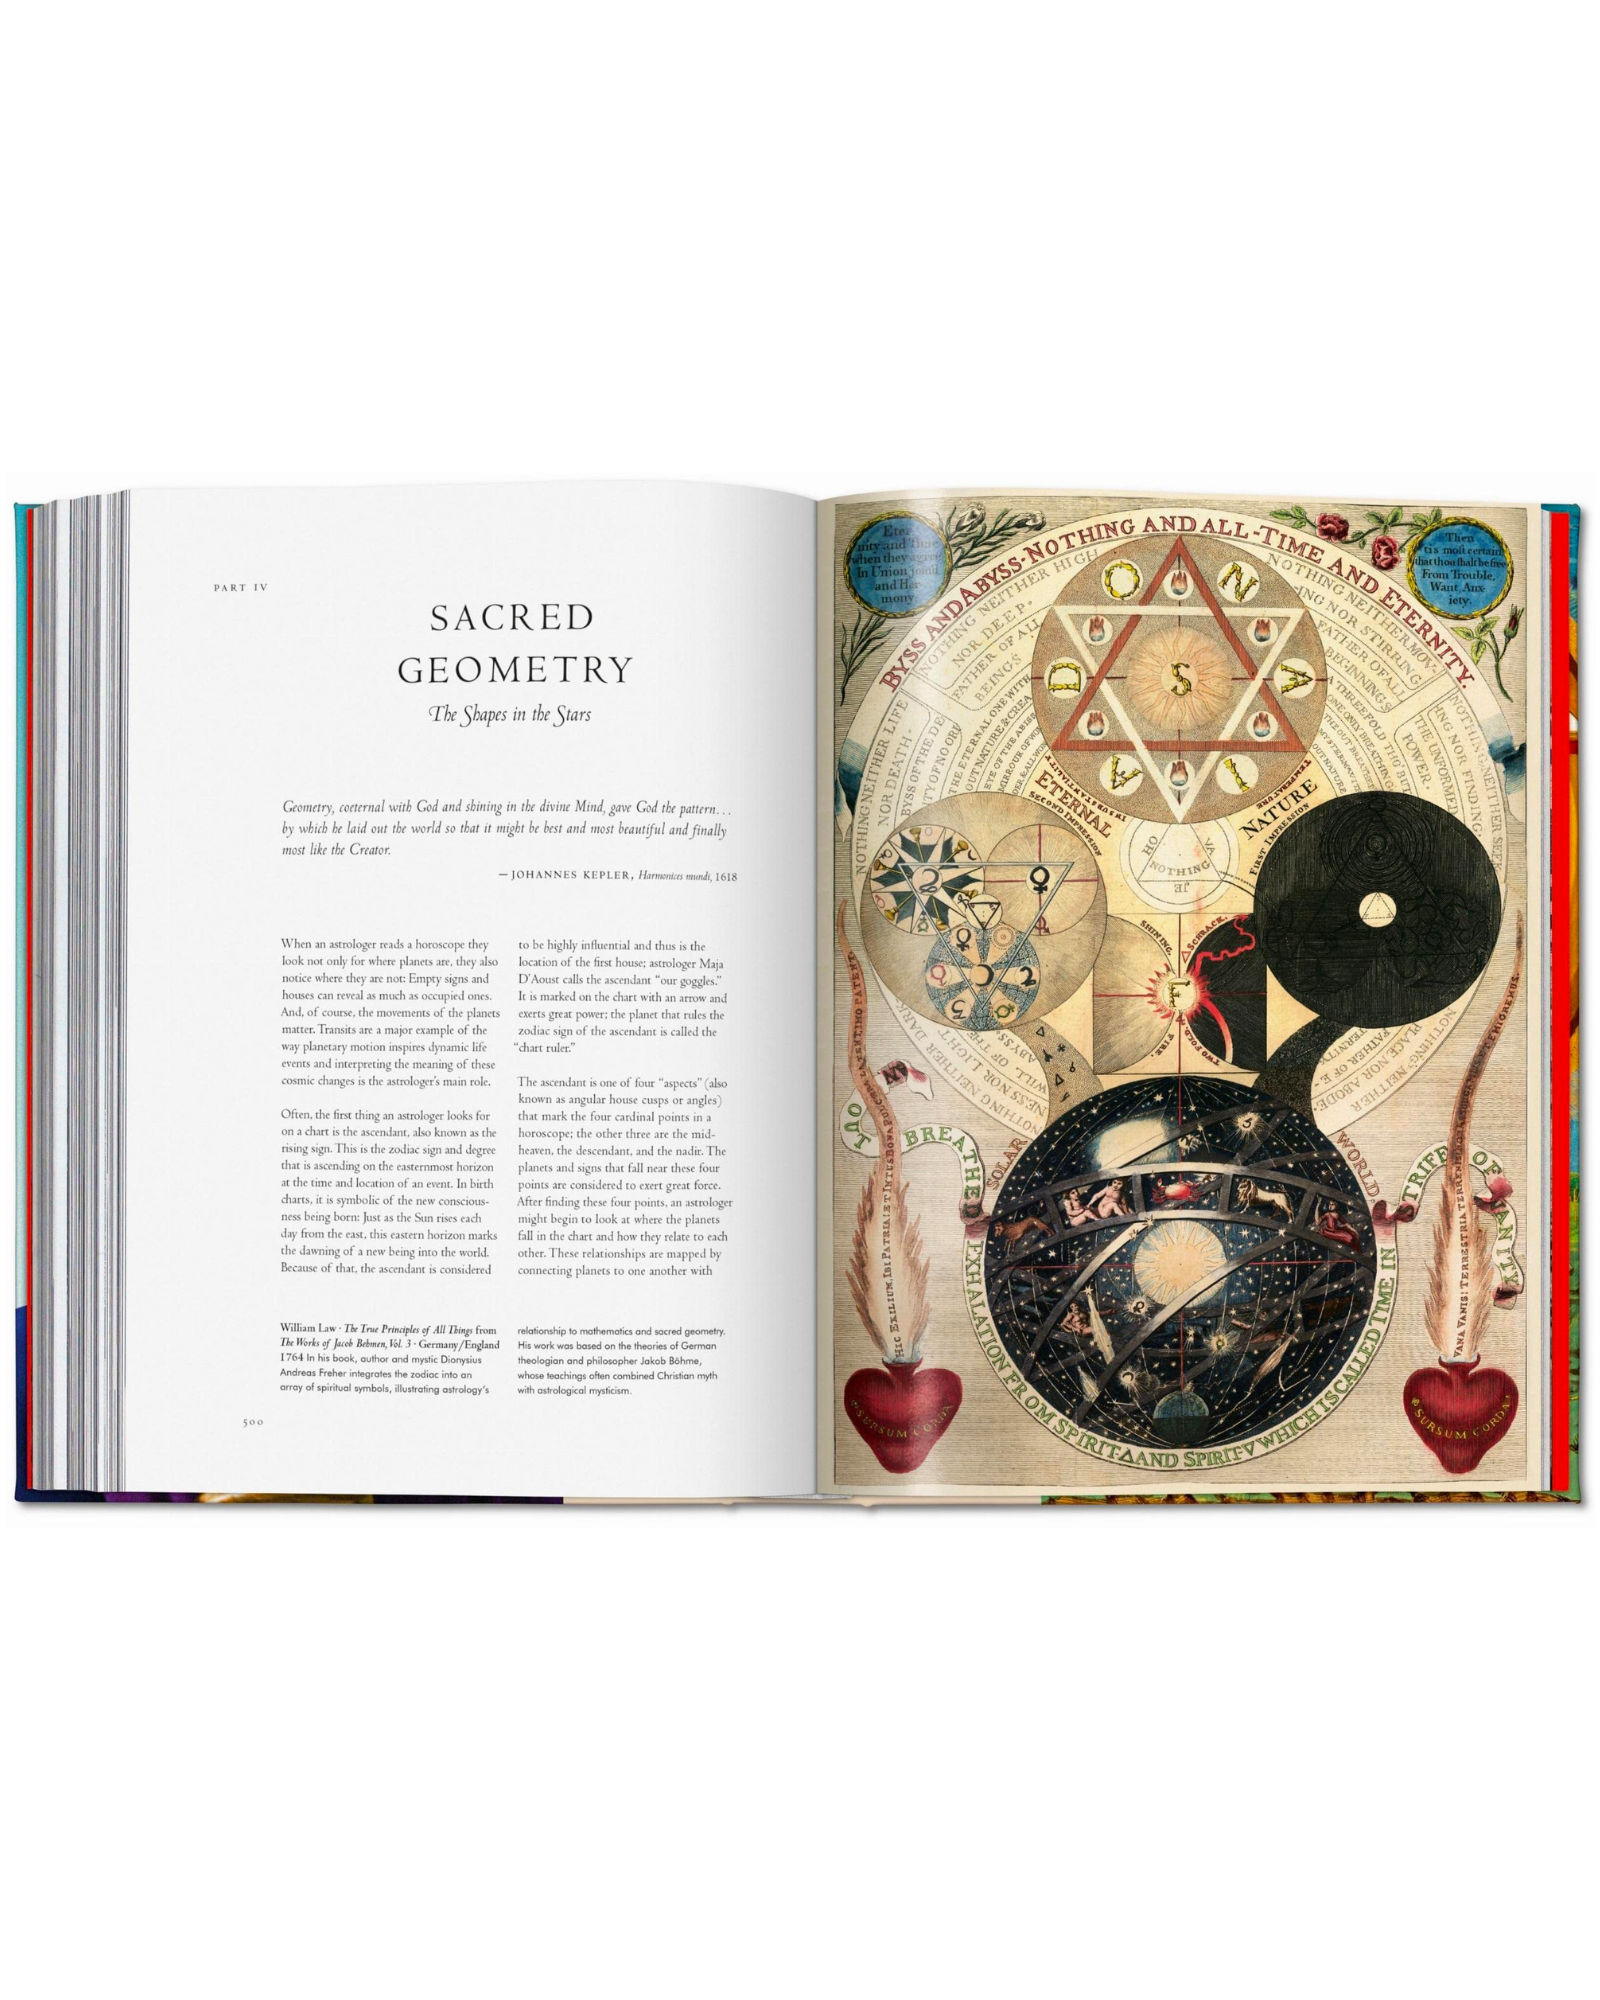 ASTROLOGY LIBRARY OF ESOTERICA - BOOK